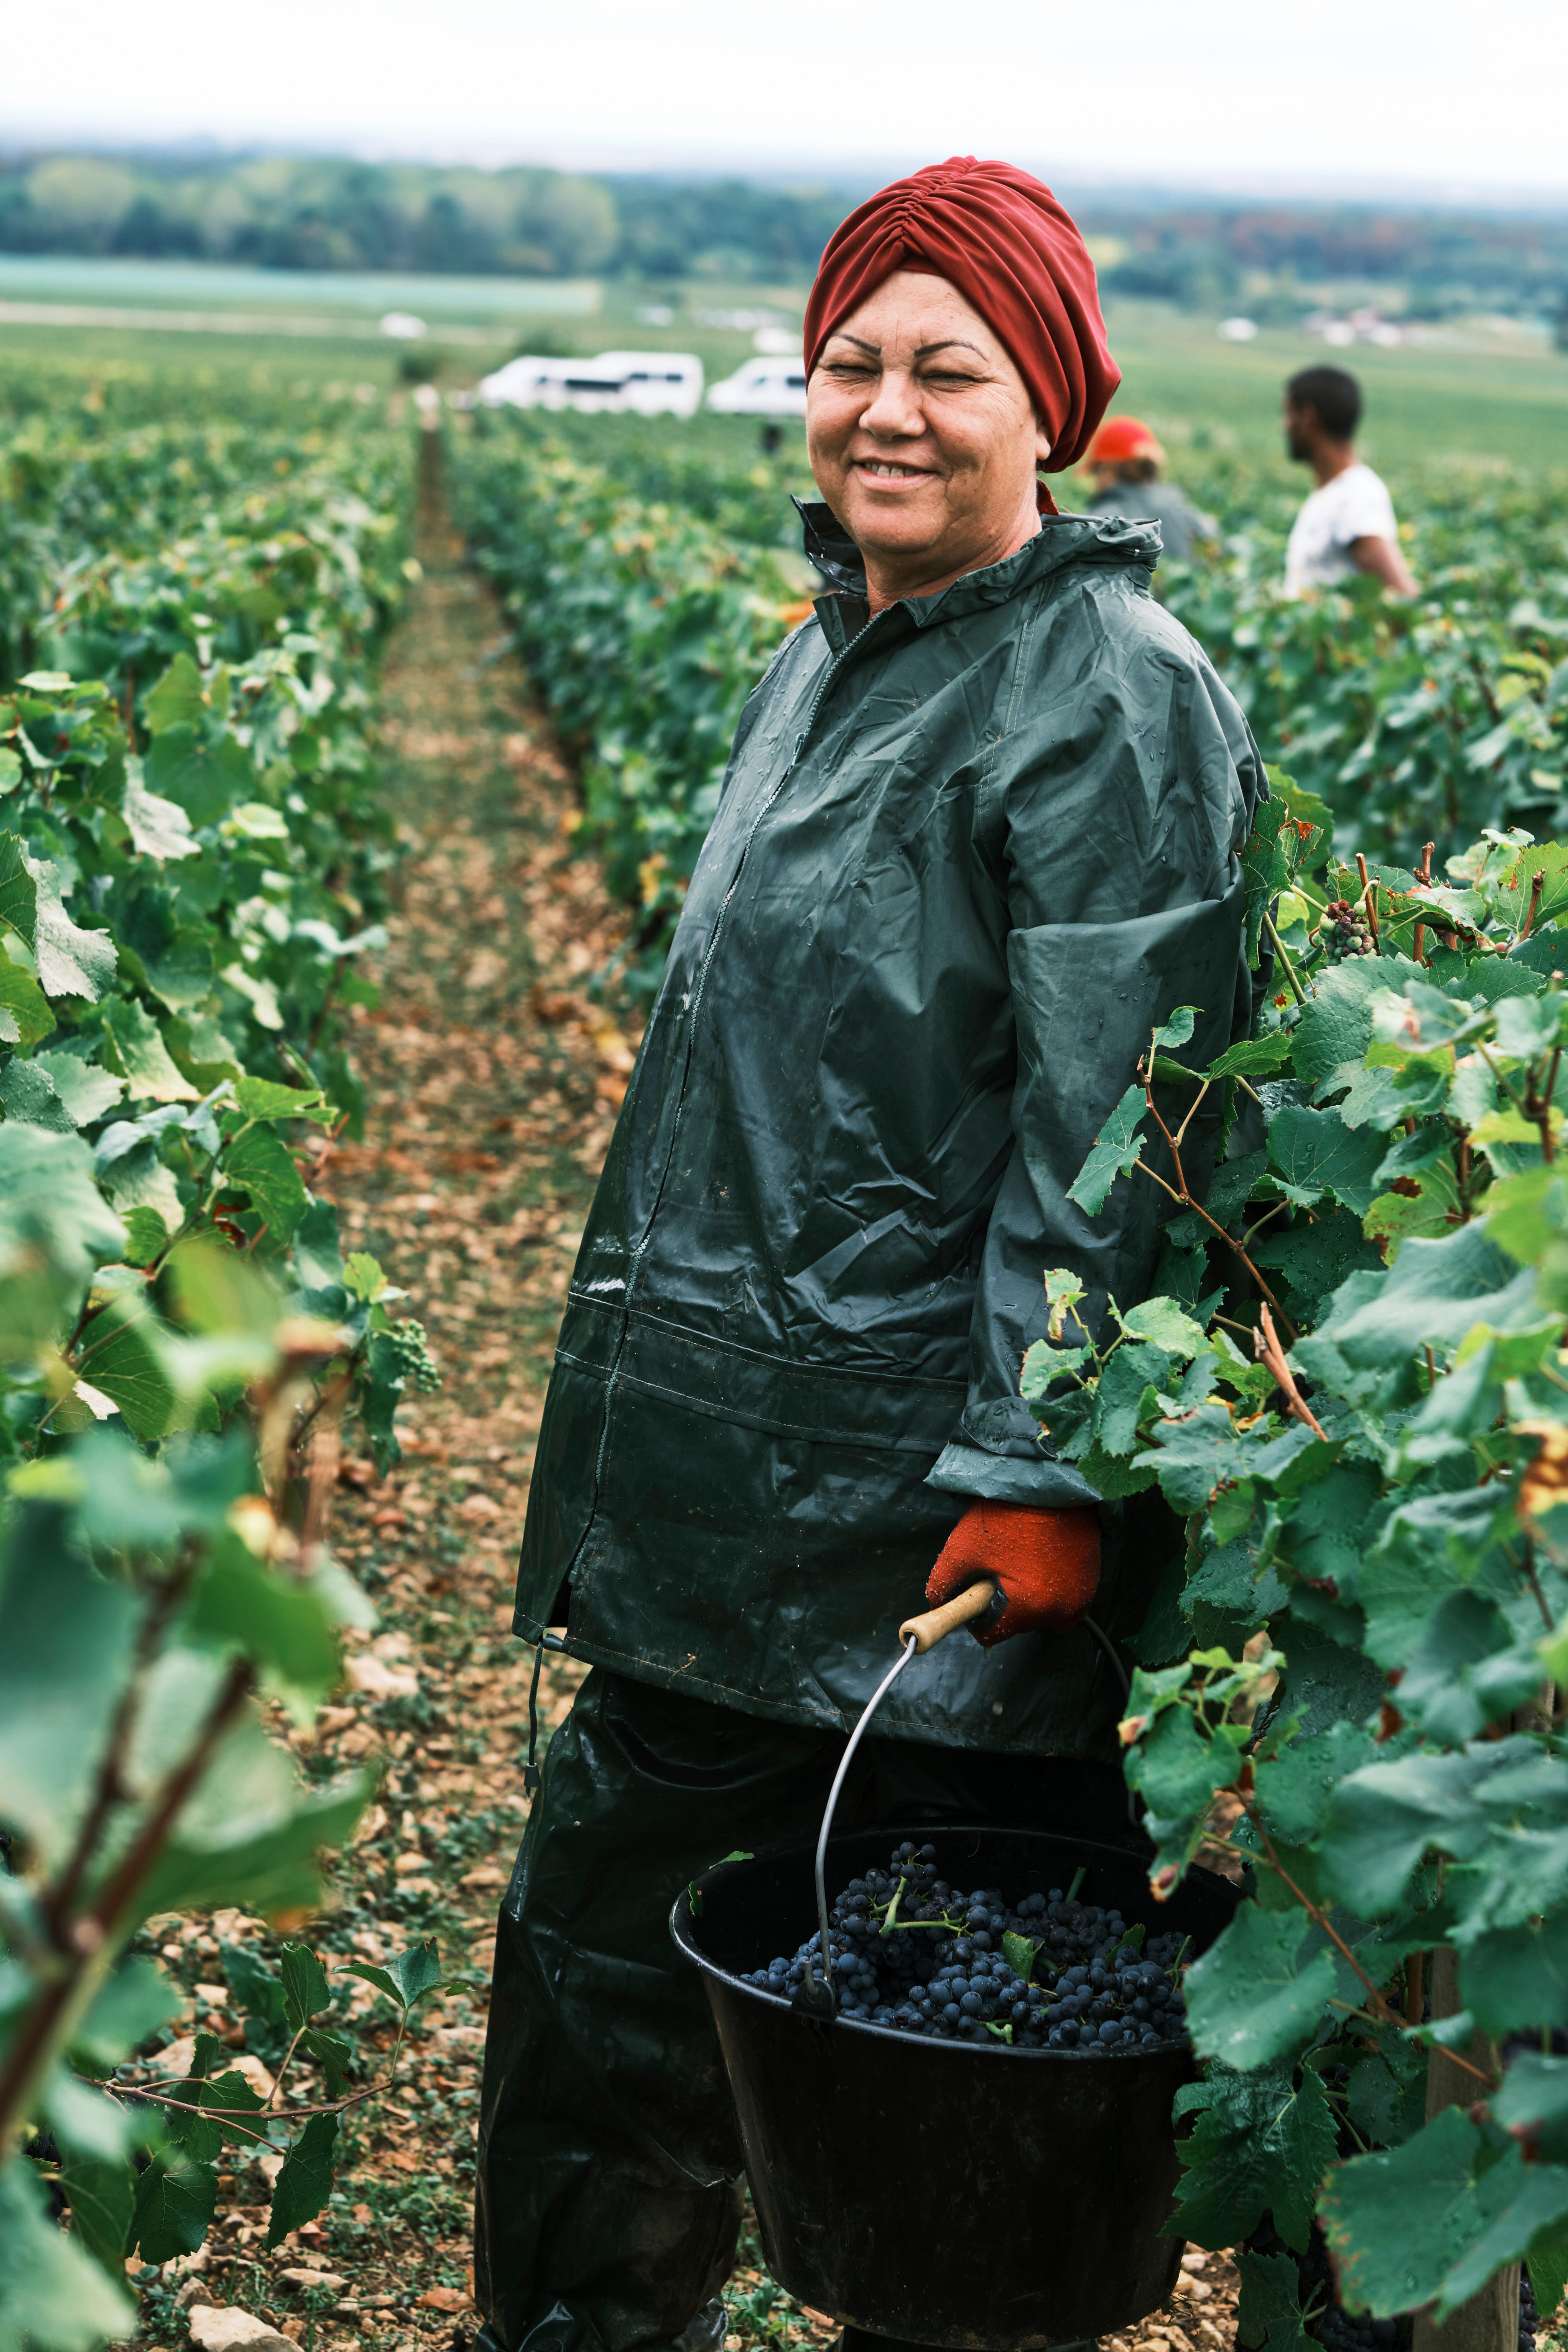 A worker among the vines at harvest time at Domaine Faiveley.